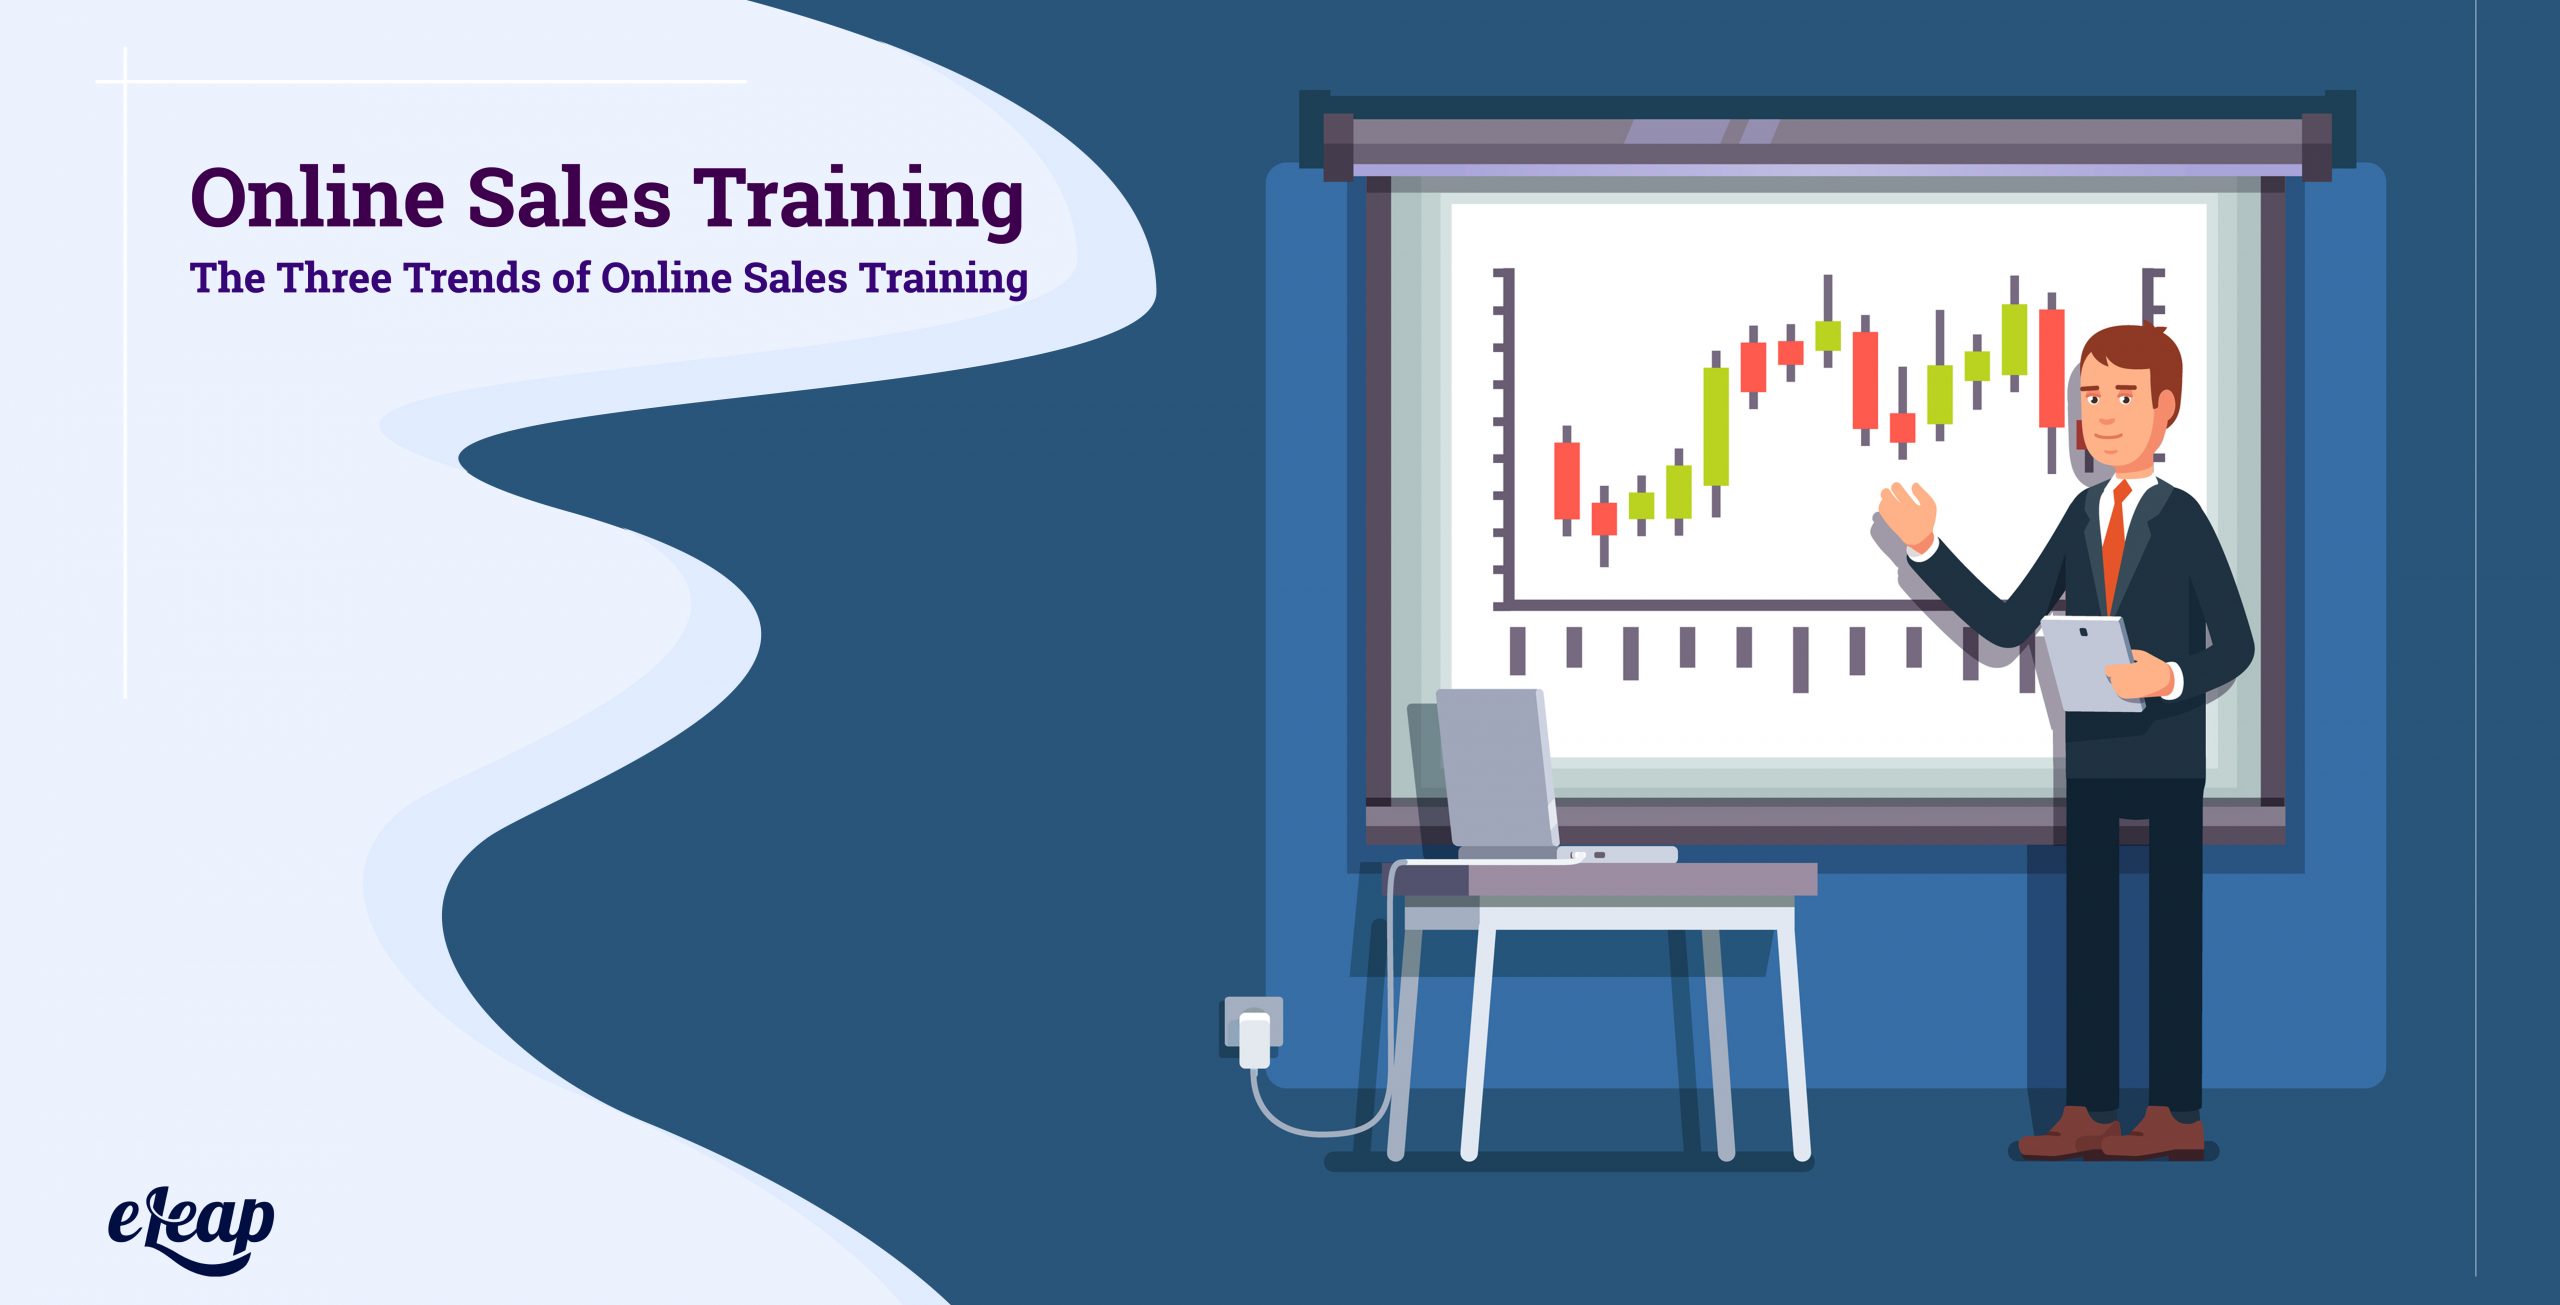 Are You Getting Your Money's Worth From Sales Training Programs?